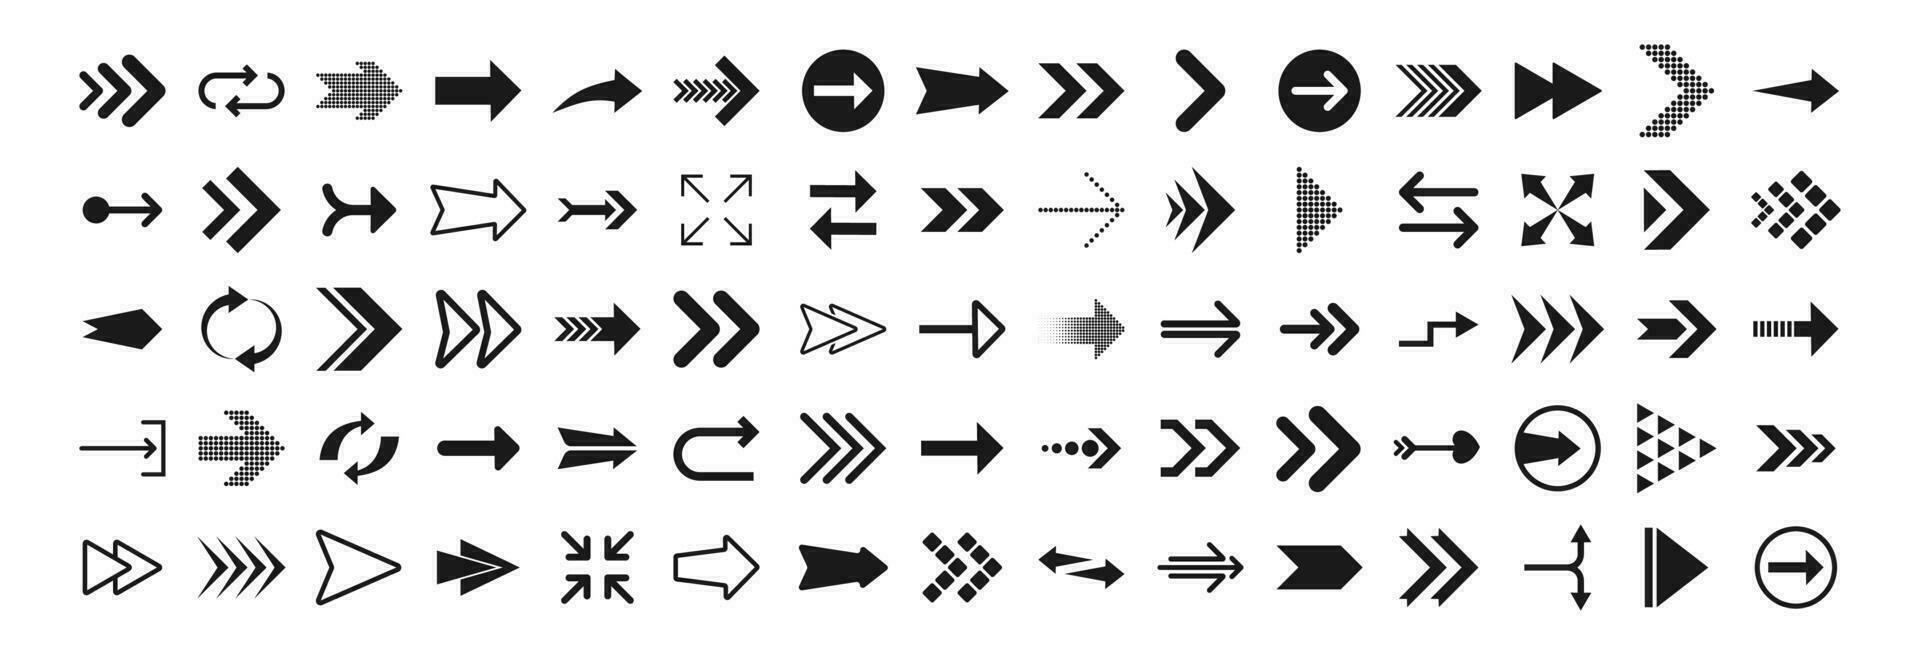 Arrows big black set icons. Arrow icon. Arrows for web design, mobile apps, interface and more. Vector stock illustration